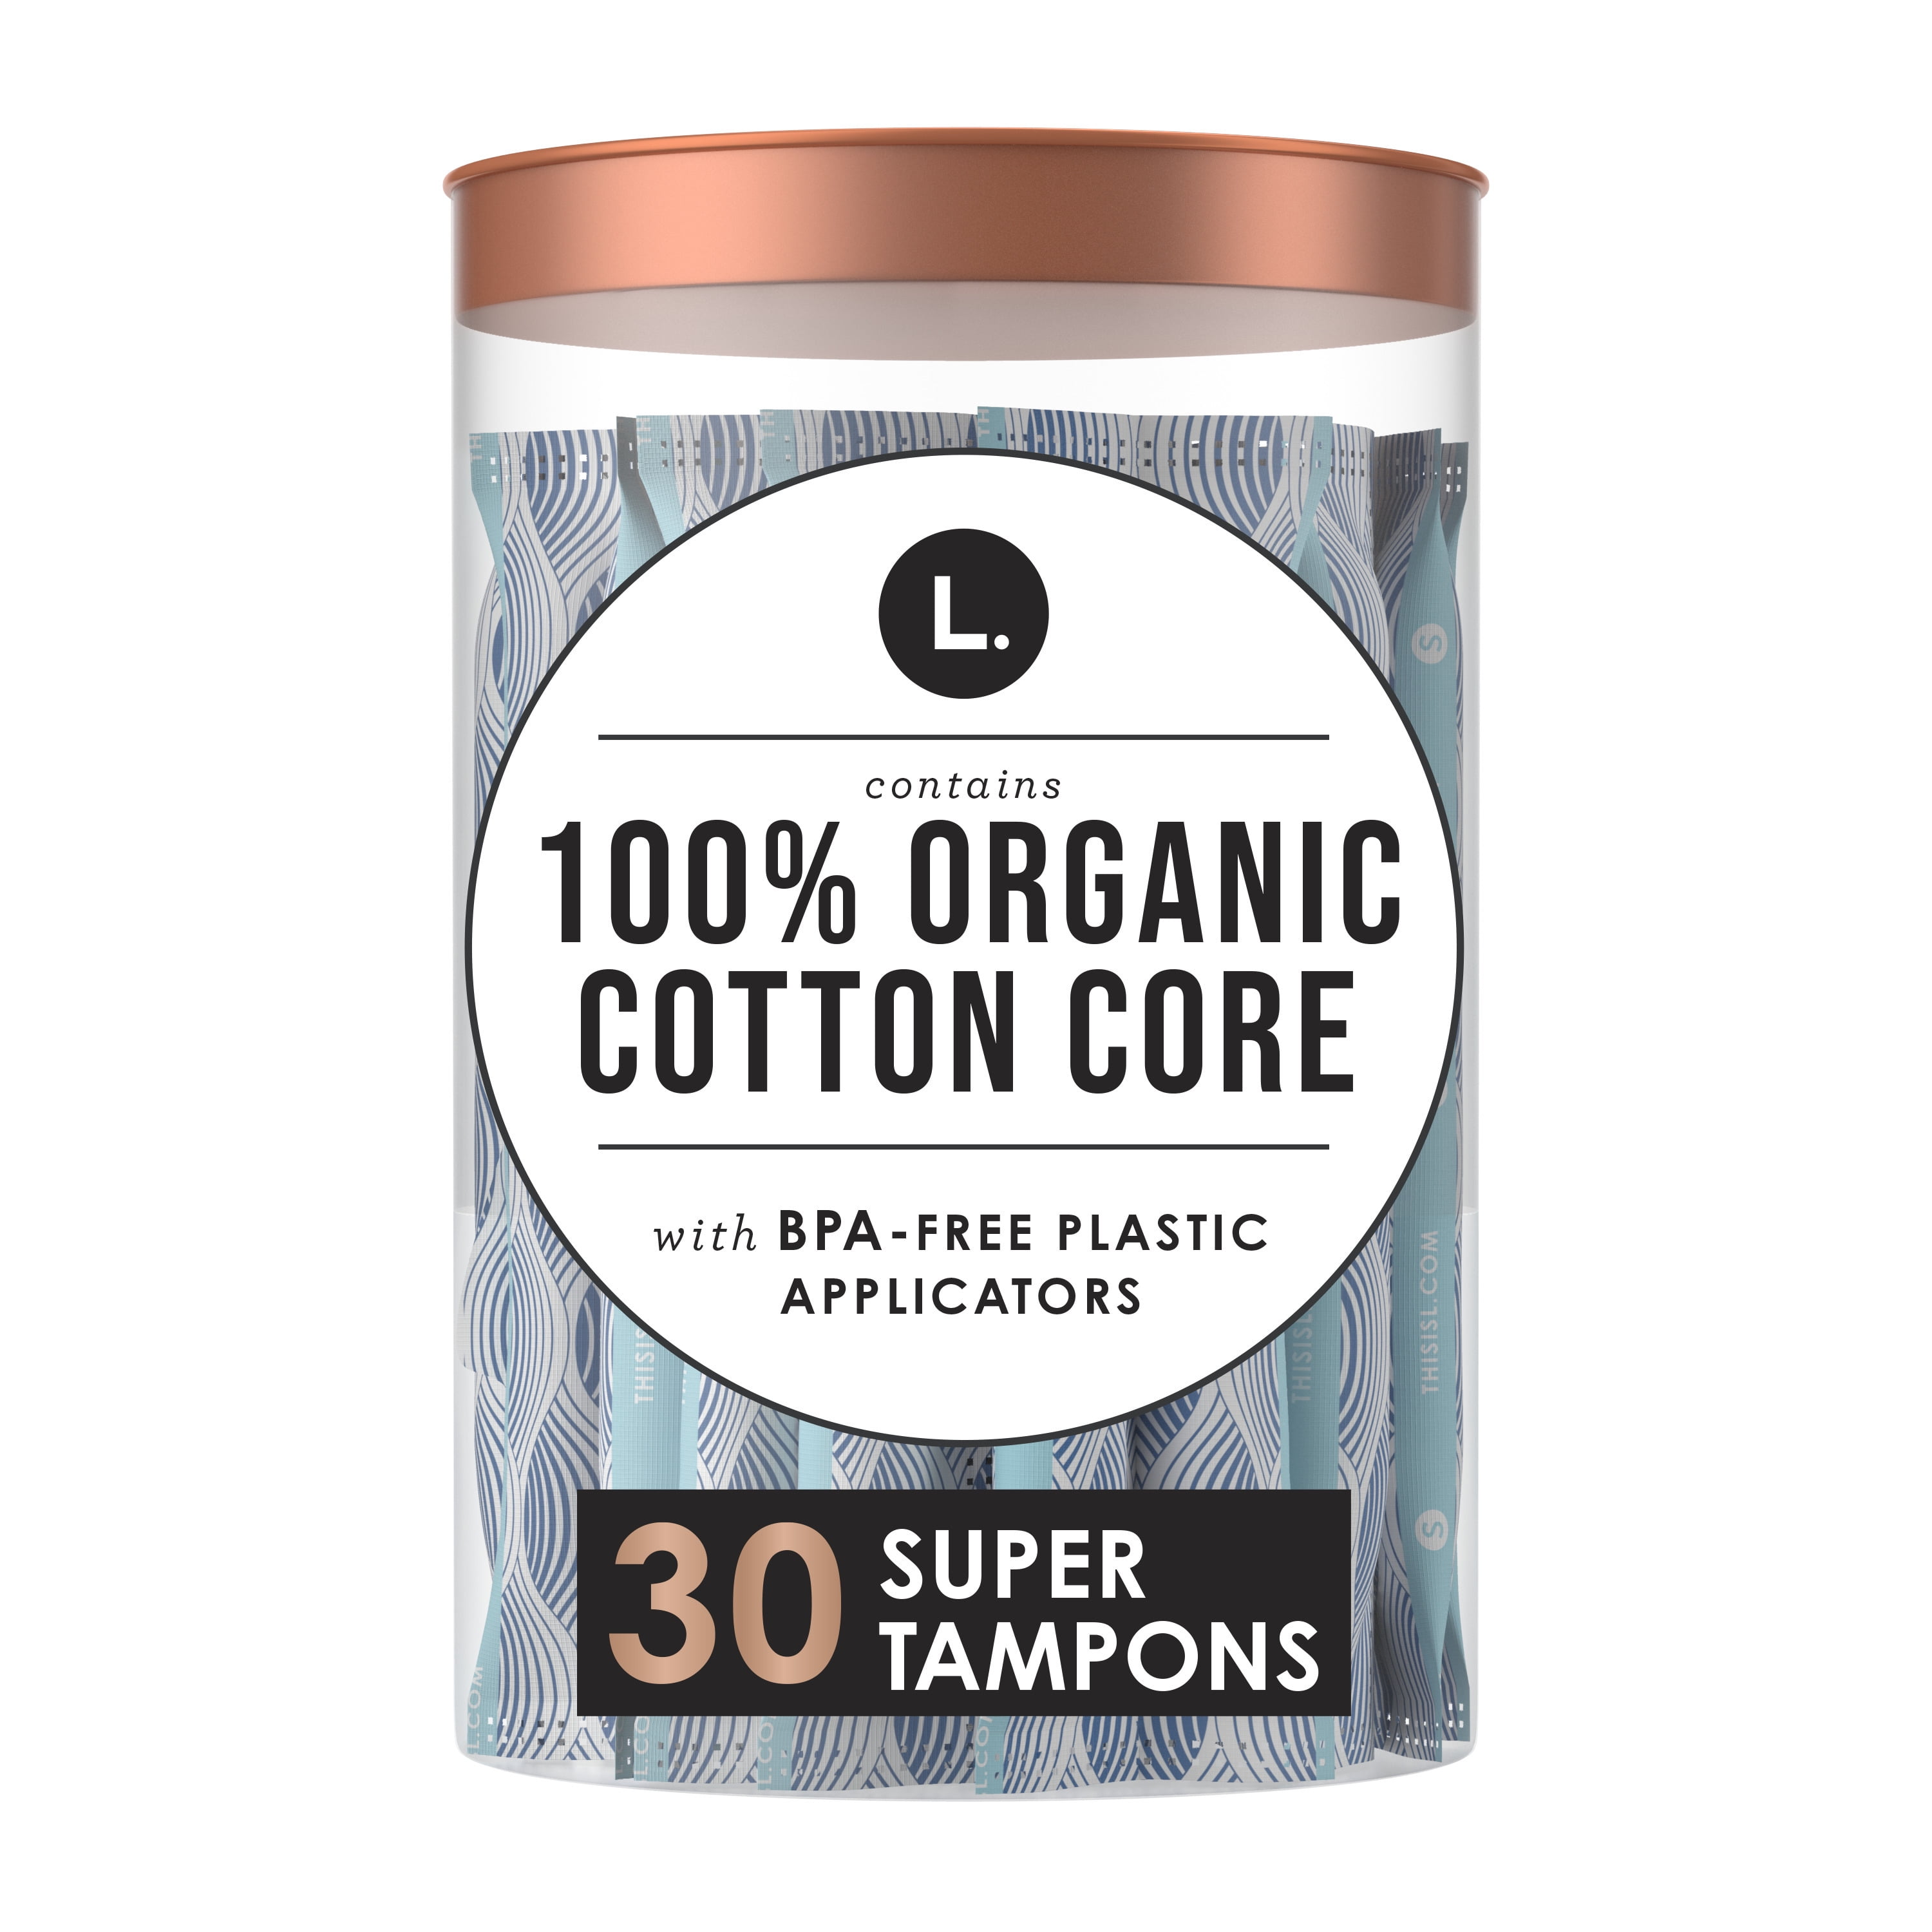 L. Organic Cotton Core Tampons, Super Absorbency, 30 Count